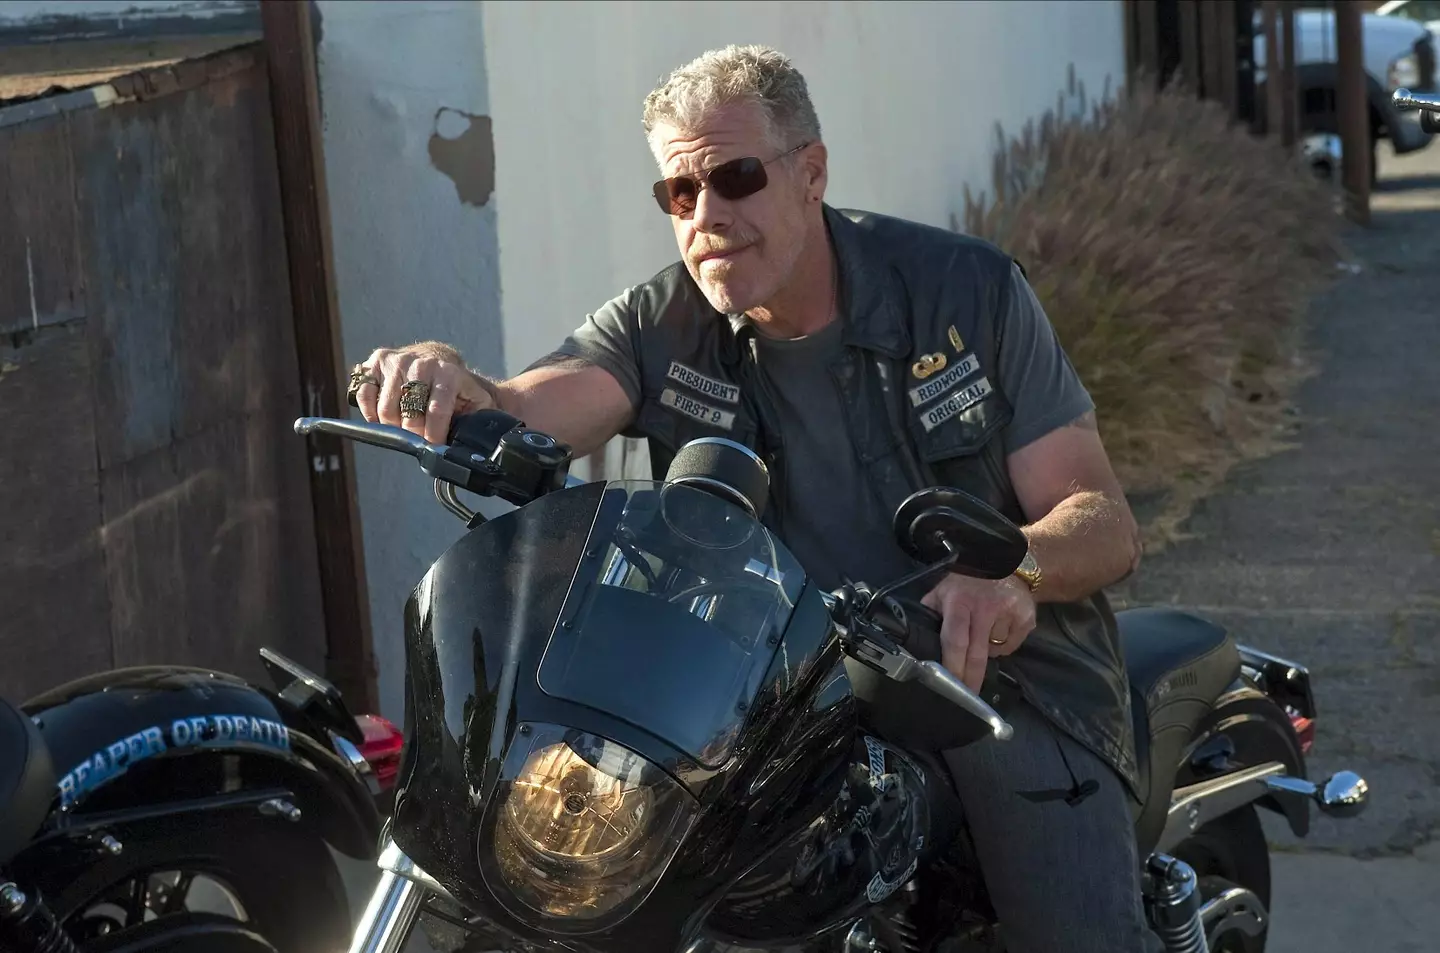 Ron Perlman starred as Clay Morrow in Sons of Anarchy, but someone else had the role before he did.